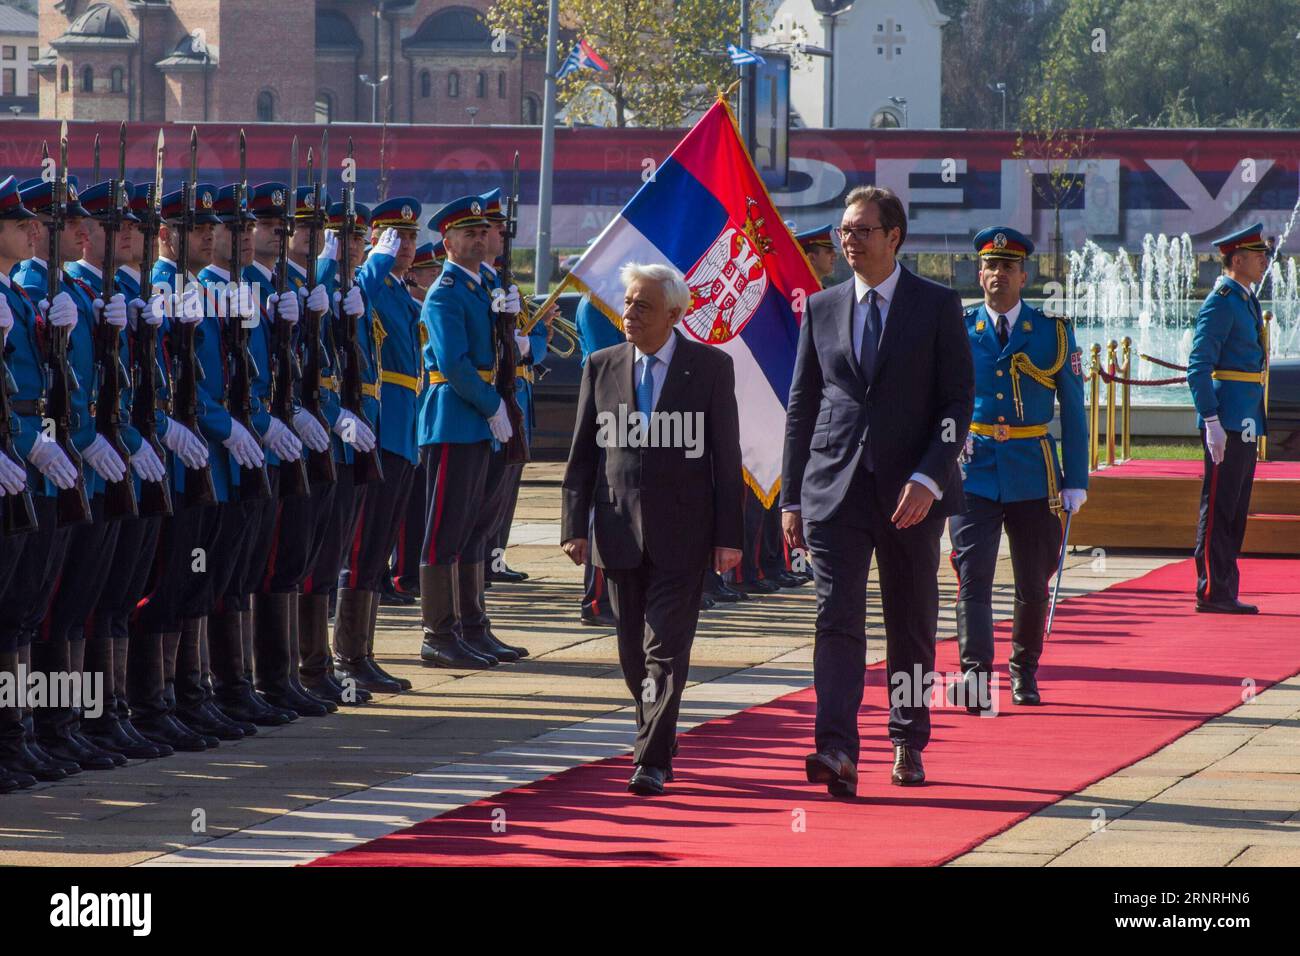 (171002) -- BELGRADE, Oct. 2, 2017 -- Visiting Greek President Prokopis Pavlopoulos (L, front) and his Serbian counterpart Aleksandar Vucic (R, front) review the honor guards in Belgrade, Serbia, Oct. 2, 2017. Greece will support Serbia as well as all other Balkan countries who wish to become part of the European Union (EU), but these countries must respect international right, as well as European principles and heritage, said Greek President Prokopis Pavlopoulos during his visit to Serbia on Monday. ) SERBIA-BELGRADE-GREECE-PRESIDENT-VISIT NemanjaxCabric PUBLICATIONxNOTxINxCHN Stock Photo